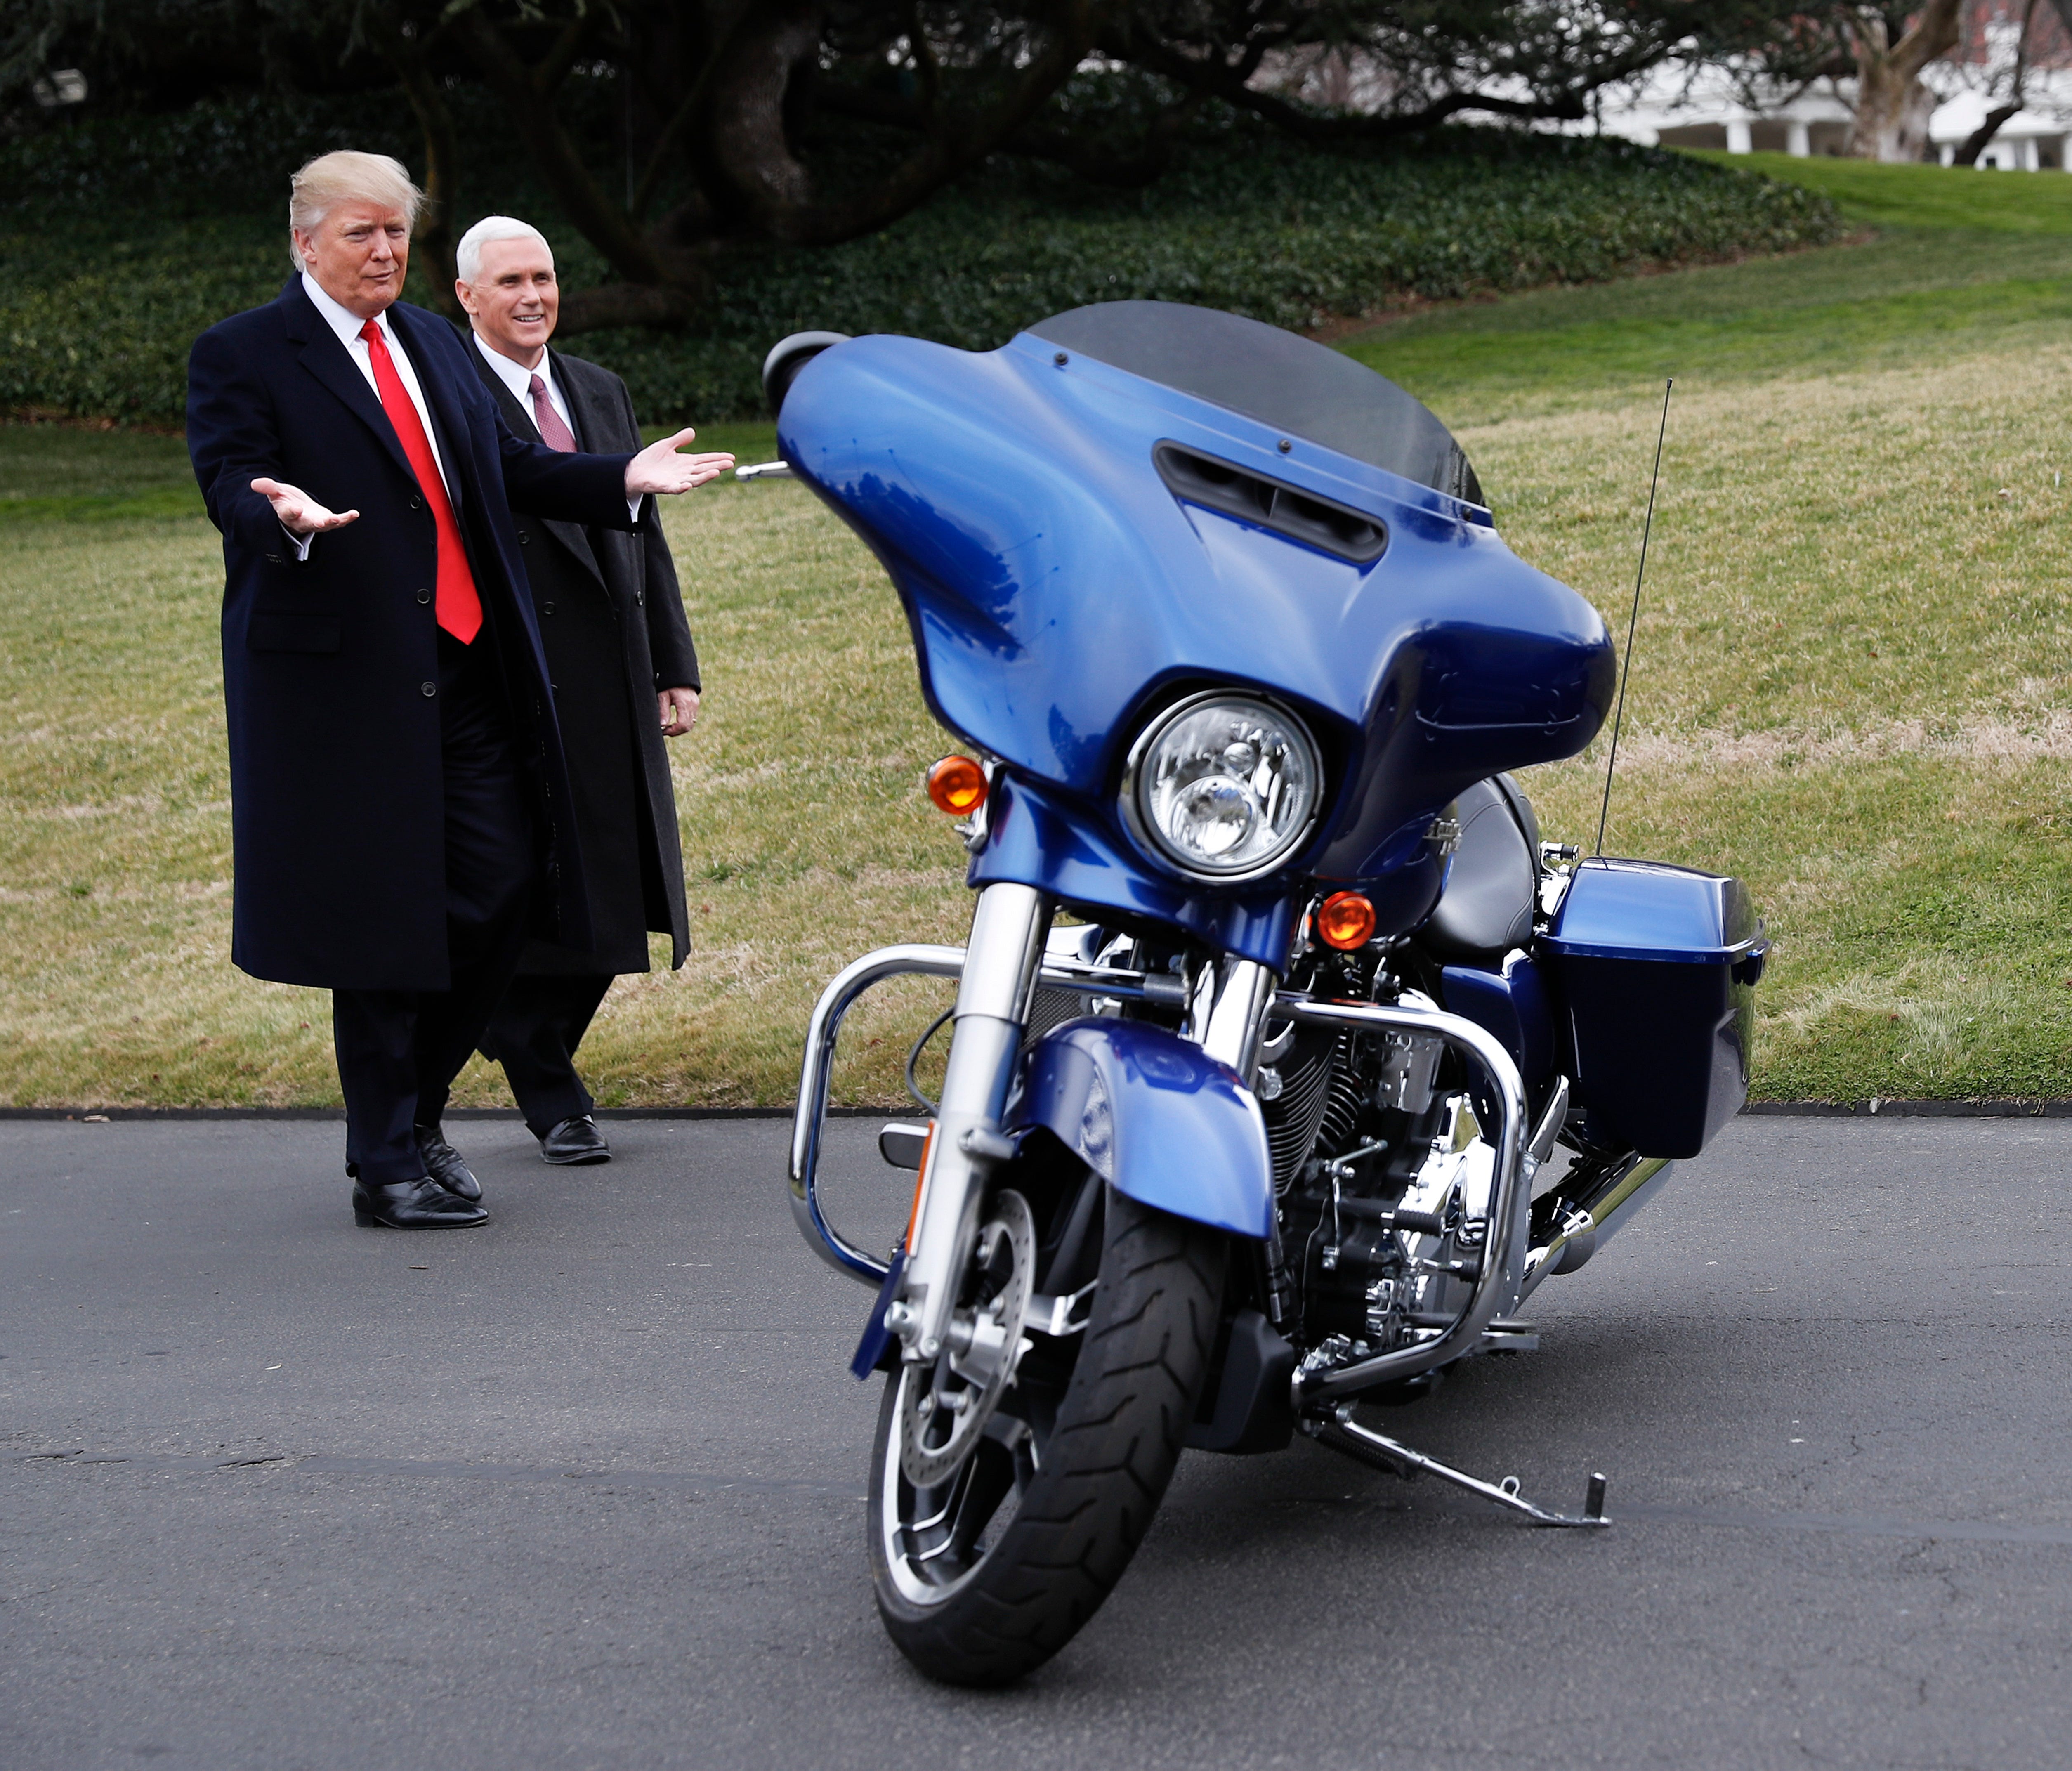 President Donald Trump and Vice President Mike Pence stop to admire a Harley Davidson motorcycle parked on the South Lawn of the White House on Feb. 2, 2017.